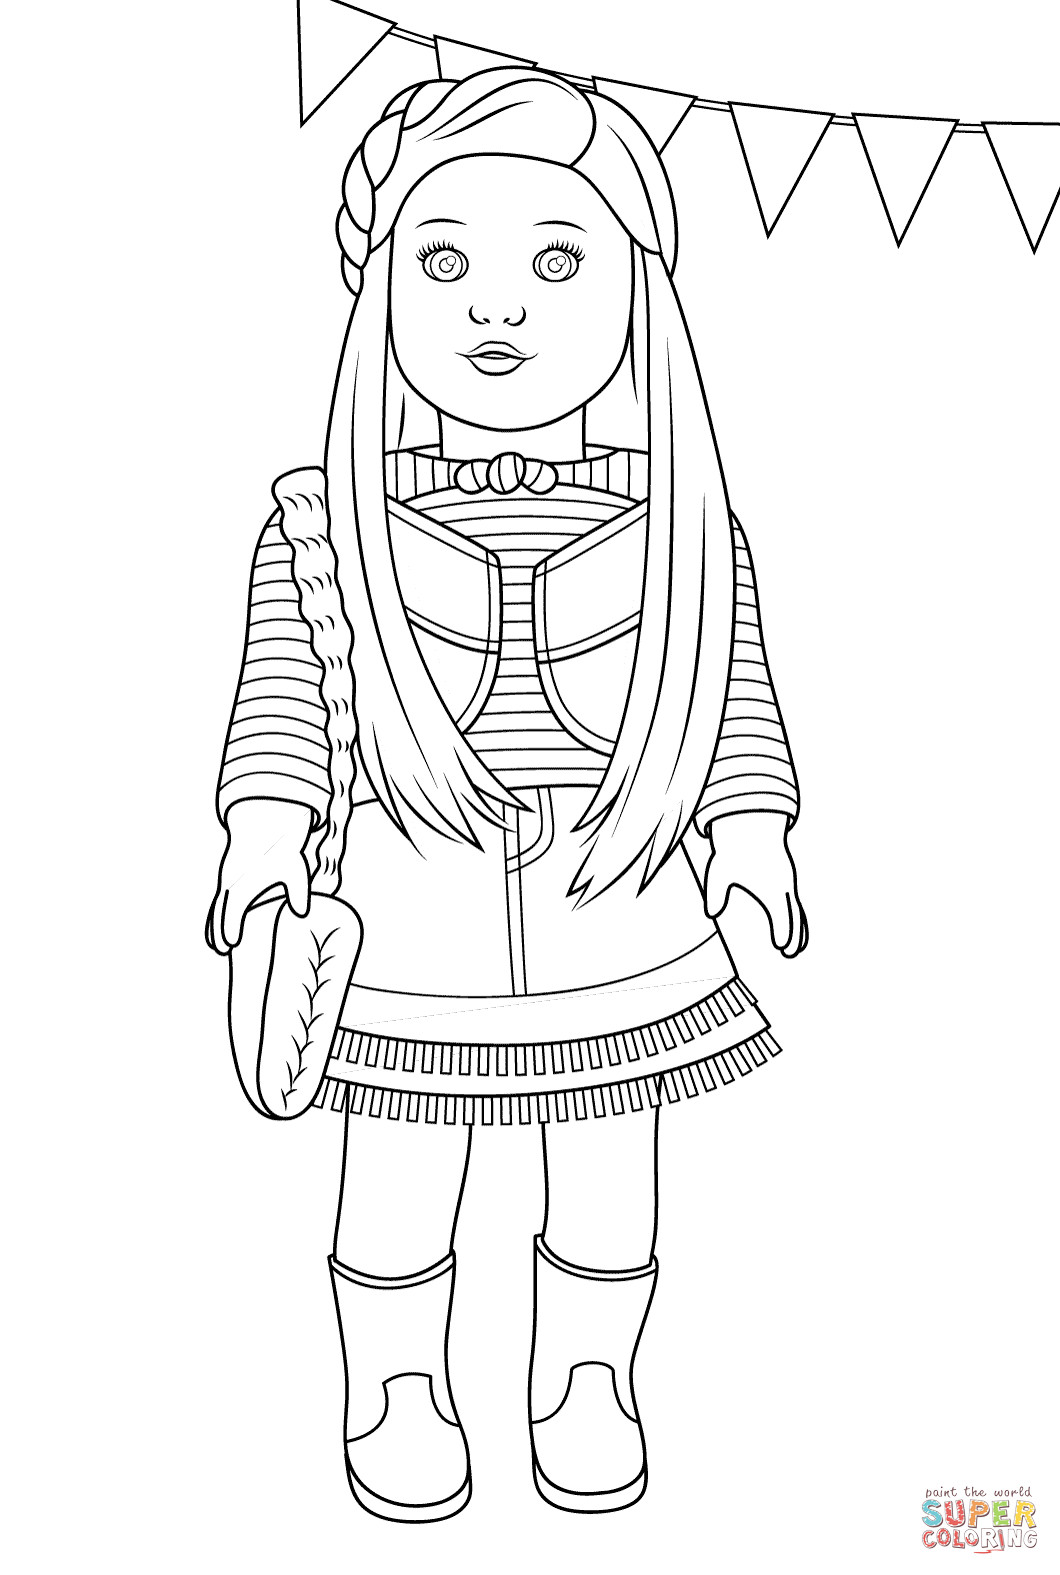 American Girl Doll Isabelle Coloring Pages
 American Girl Mckenna coloring page